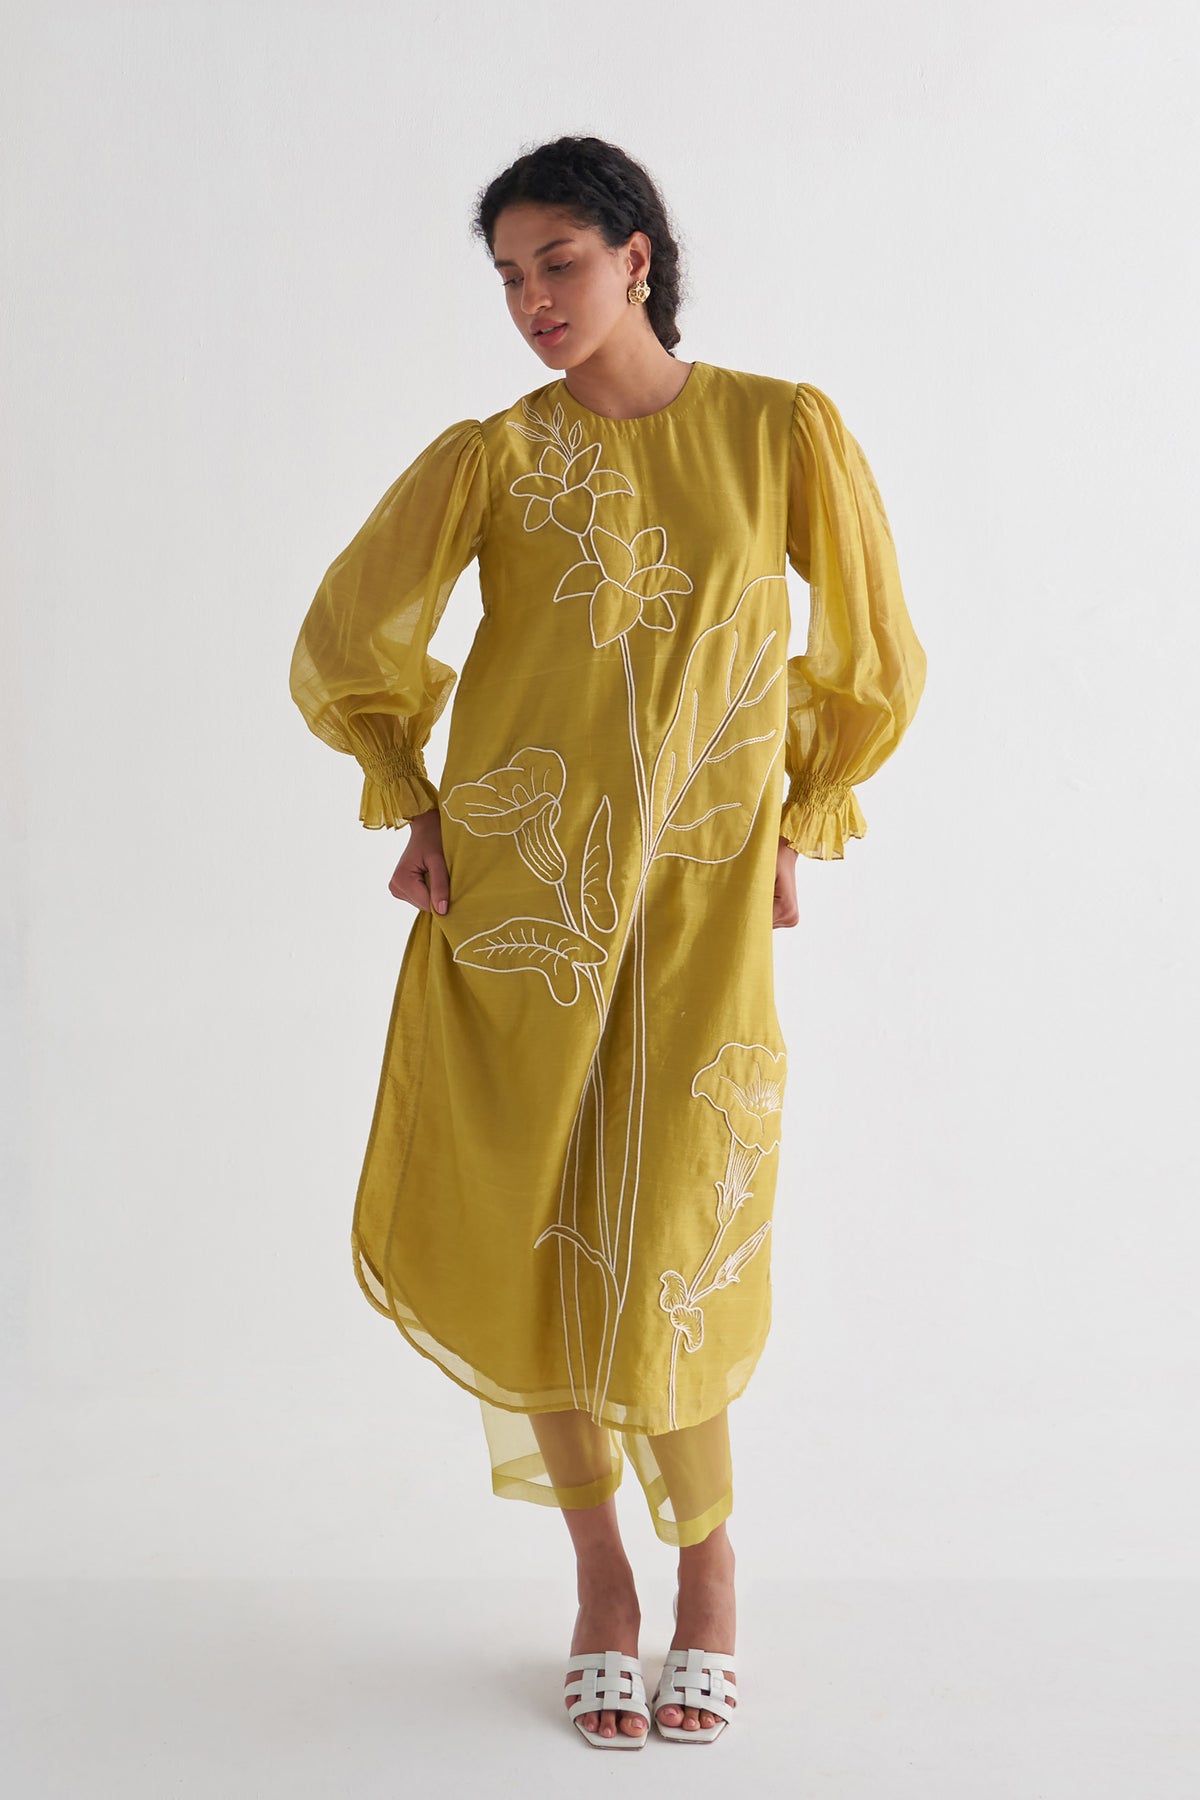 Amber Yellow Couching Dress with sheer pants